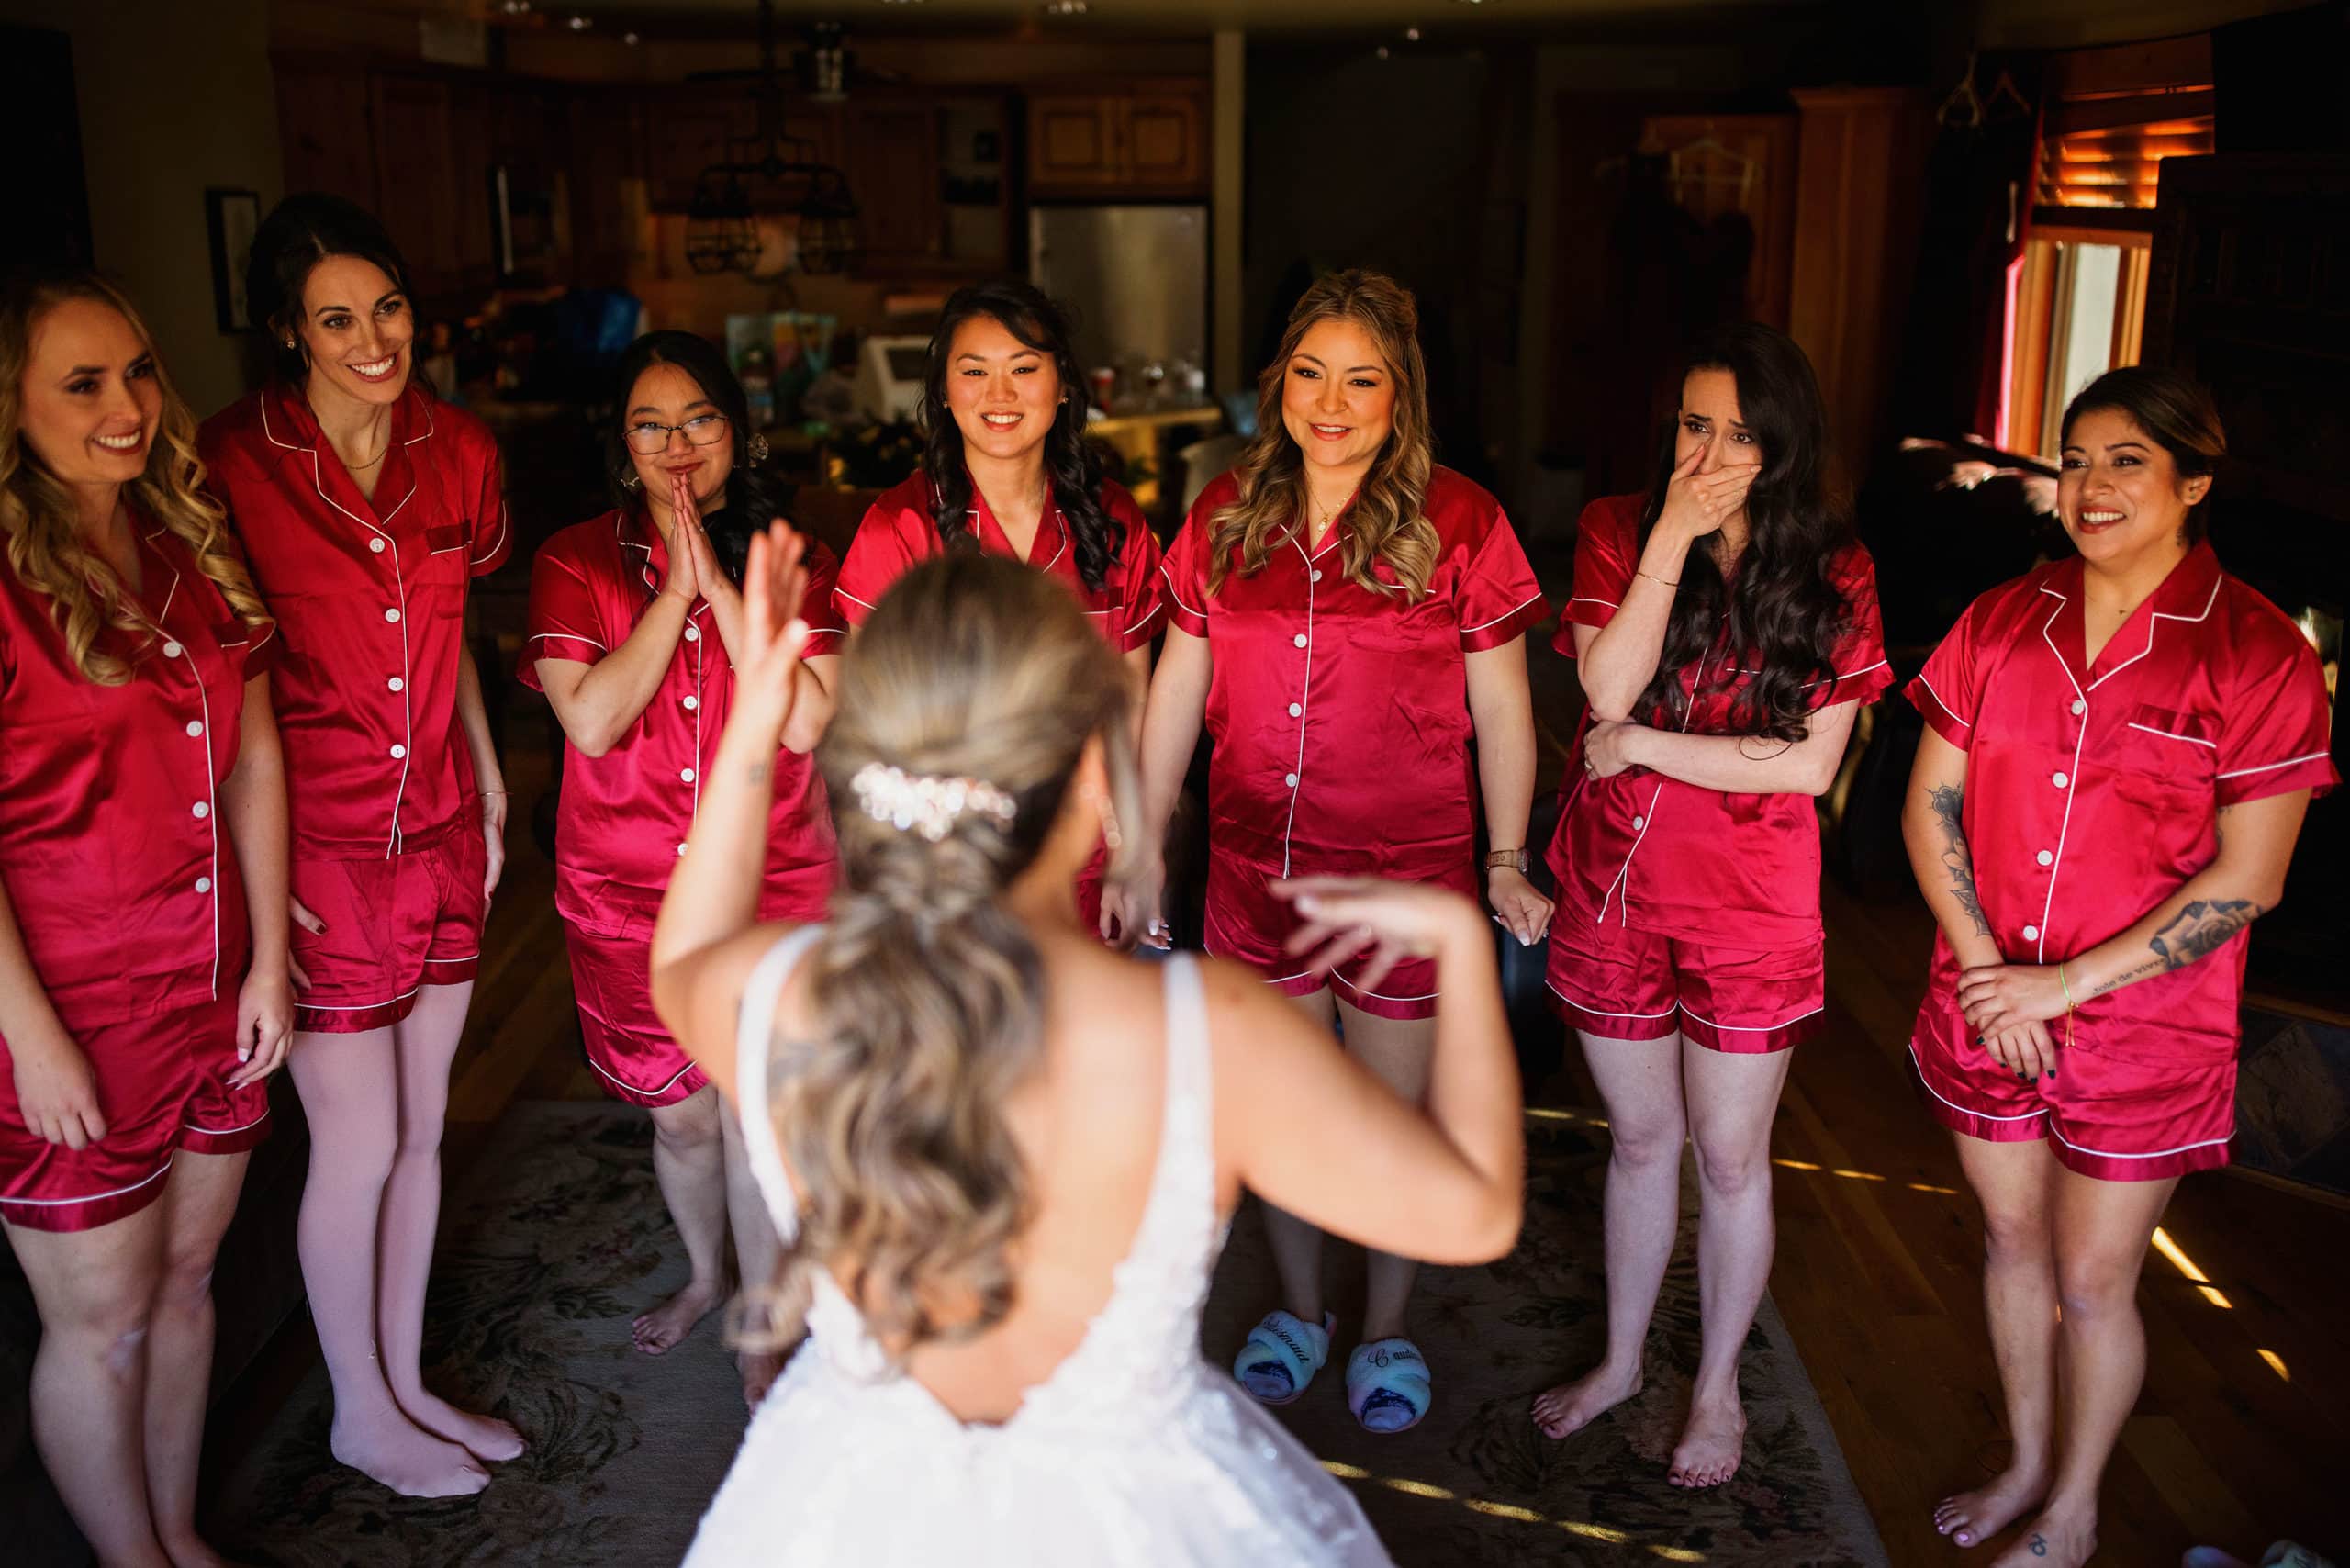 Bridesmaids react to seeing the bride during her wedding day